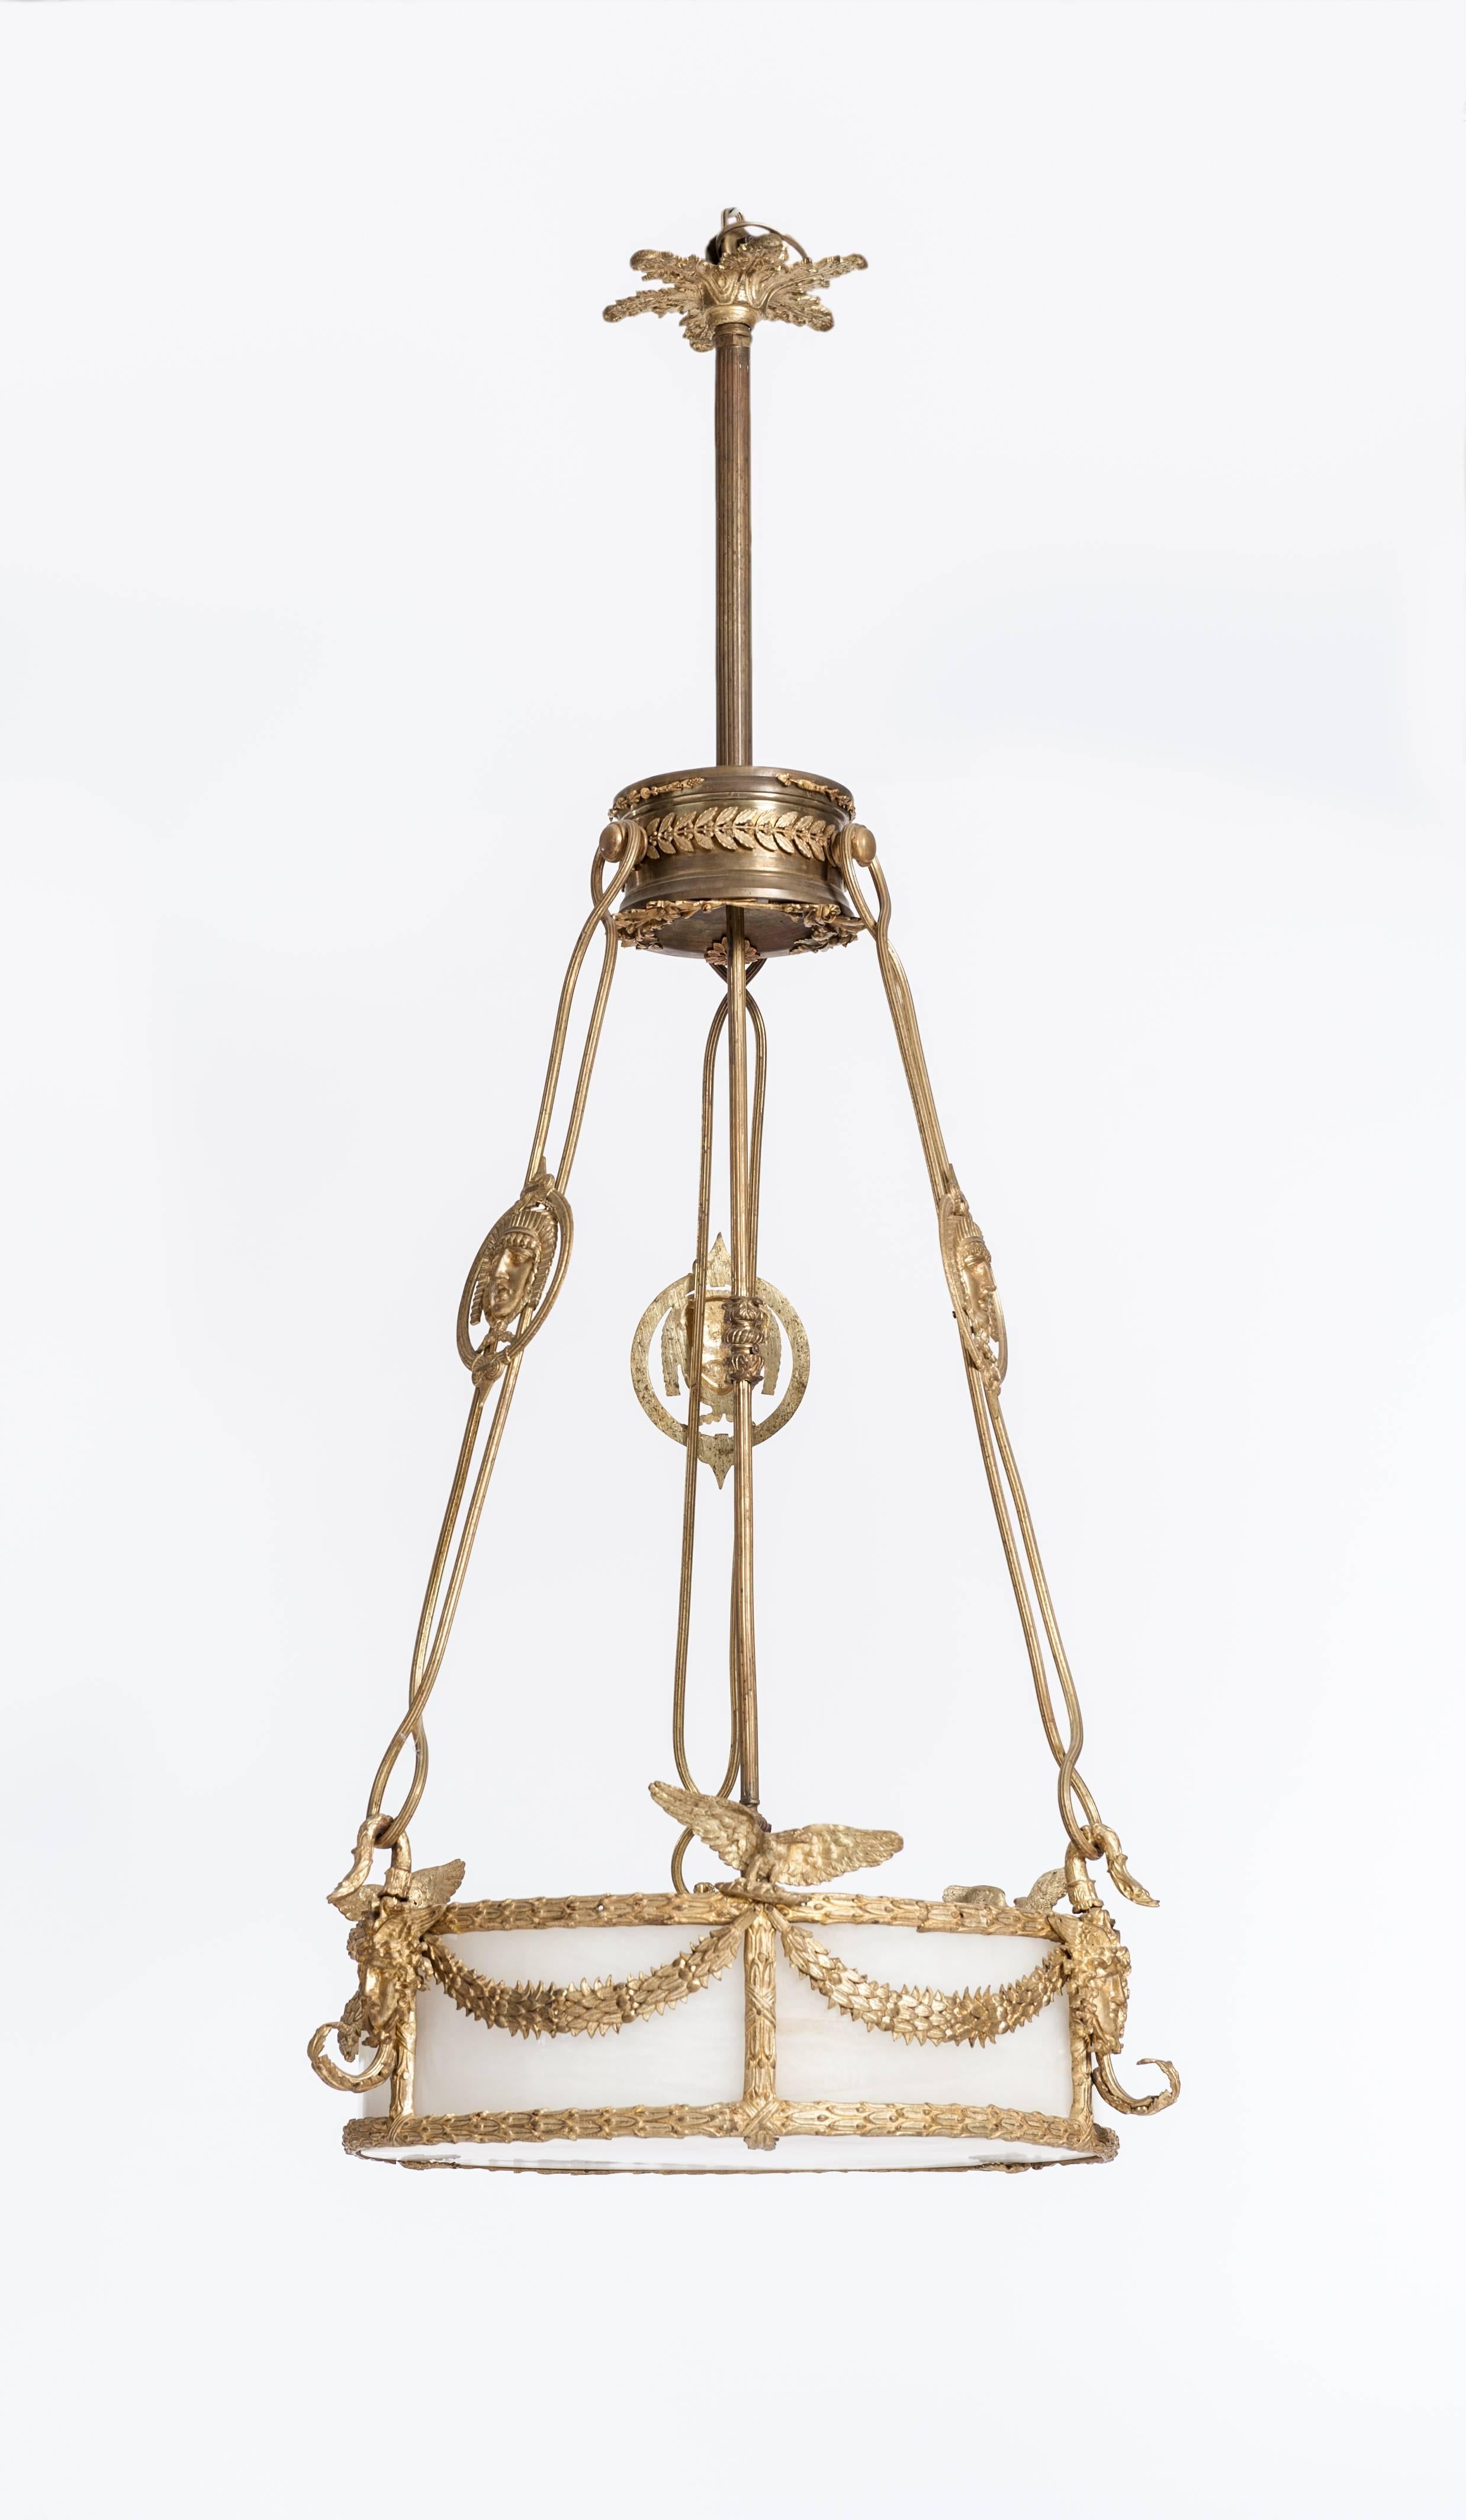 Impressive fire-gilded Empire chandelier with very fine imperial and classicist ornaments, which are
shade is made of alabaster,
The lamp body is framed by a surrounding leaf frieze, also the vertical subdivision of the shade is decorated by this